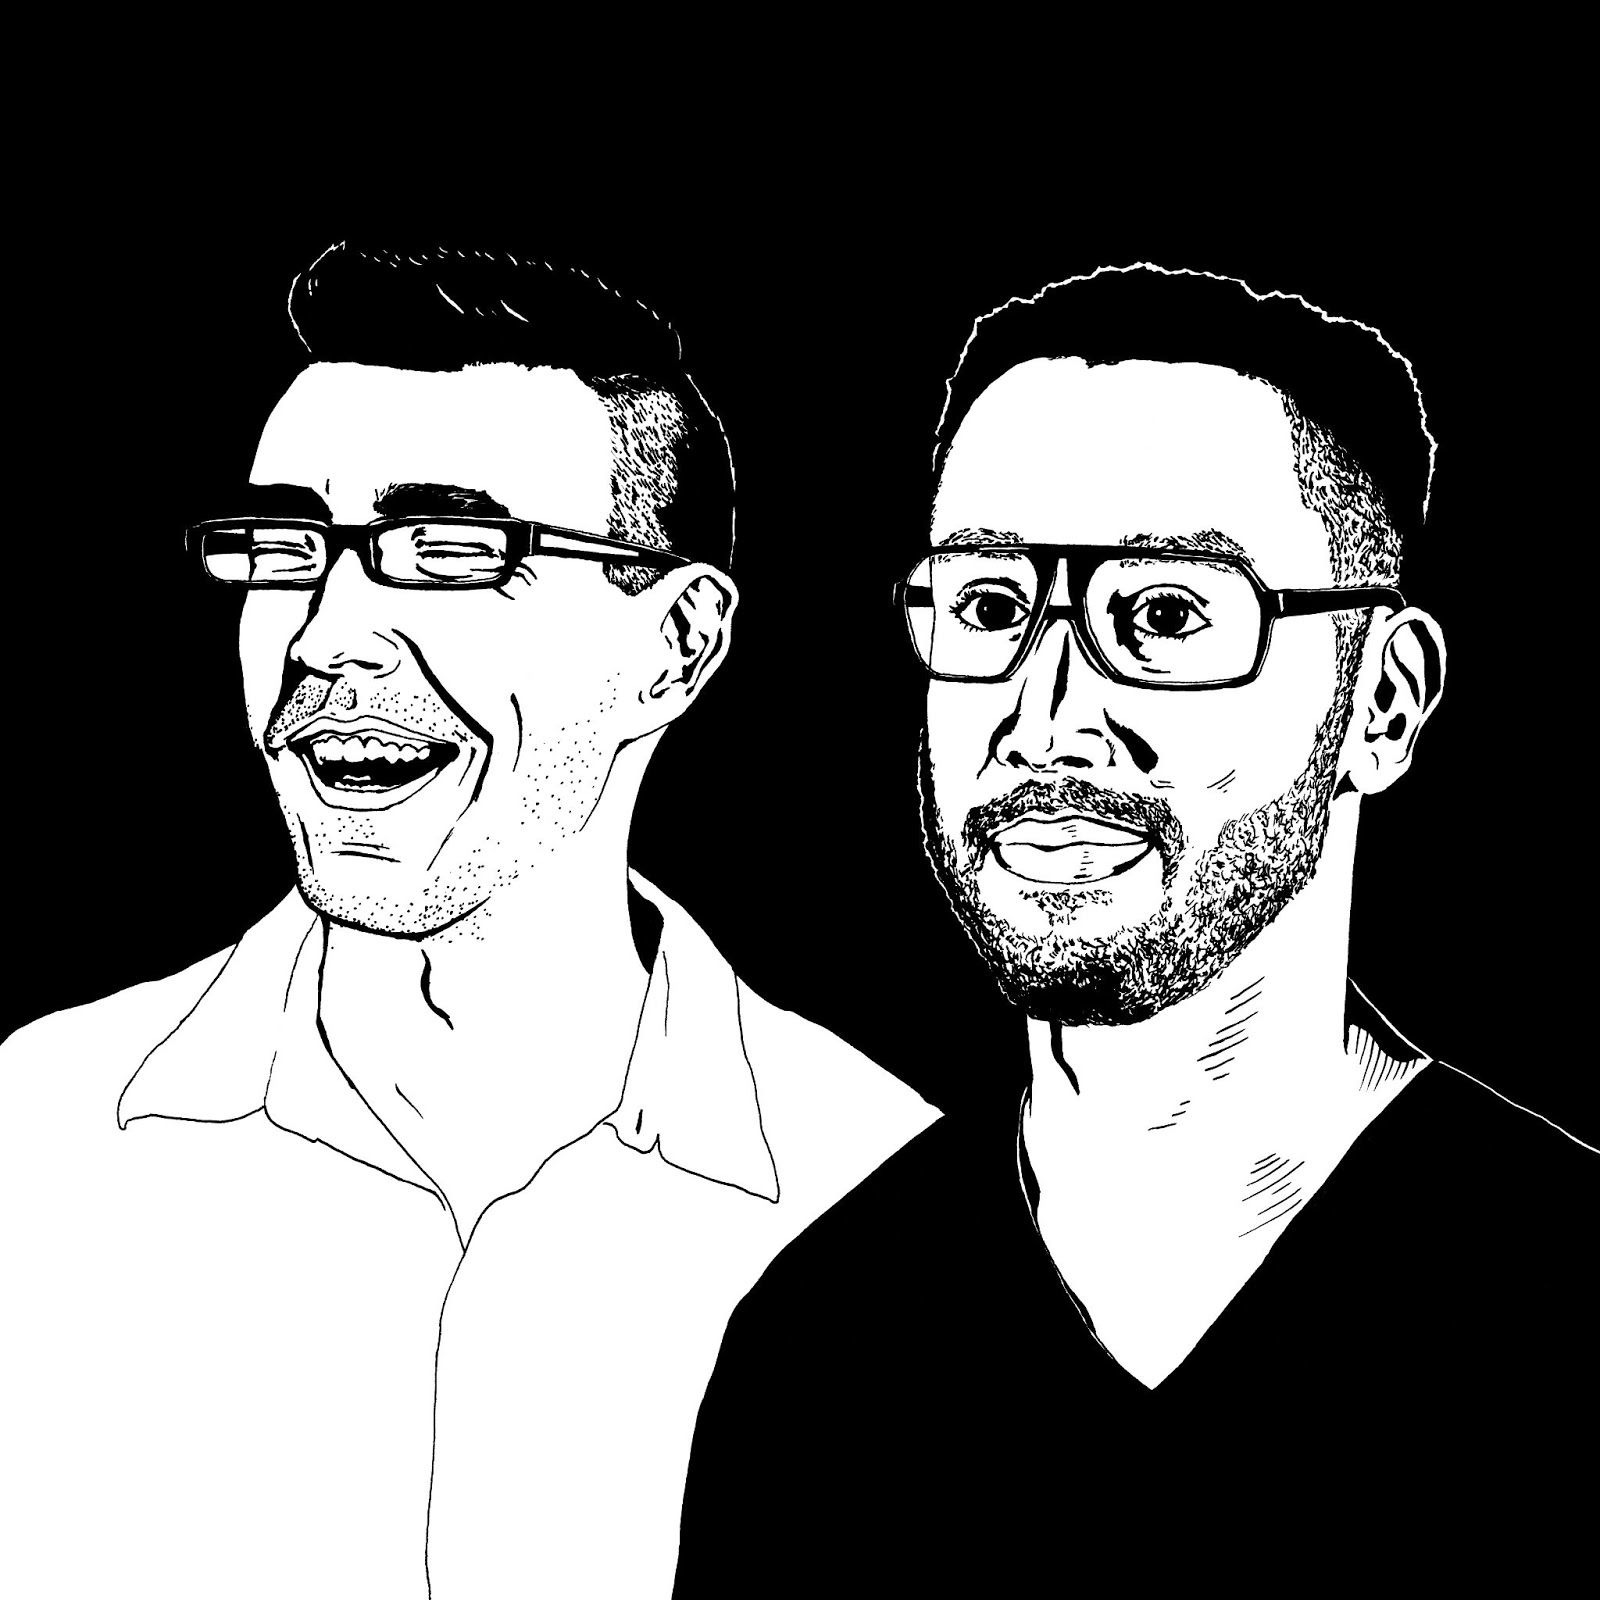 Image of two male figures with glasses one in a white button-down shirt the other in a black tshirt